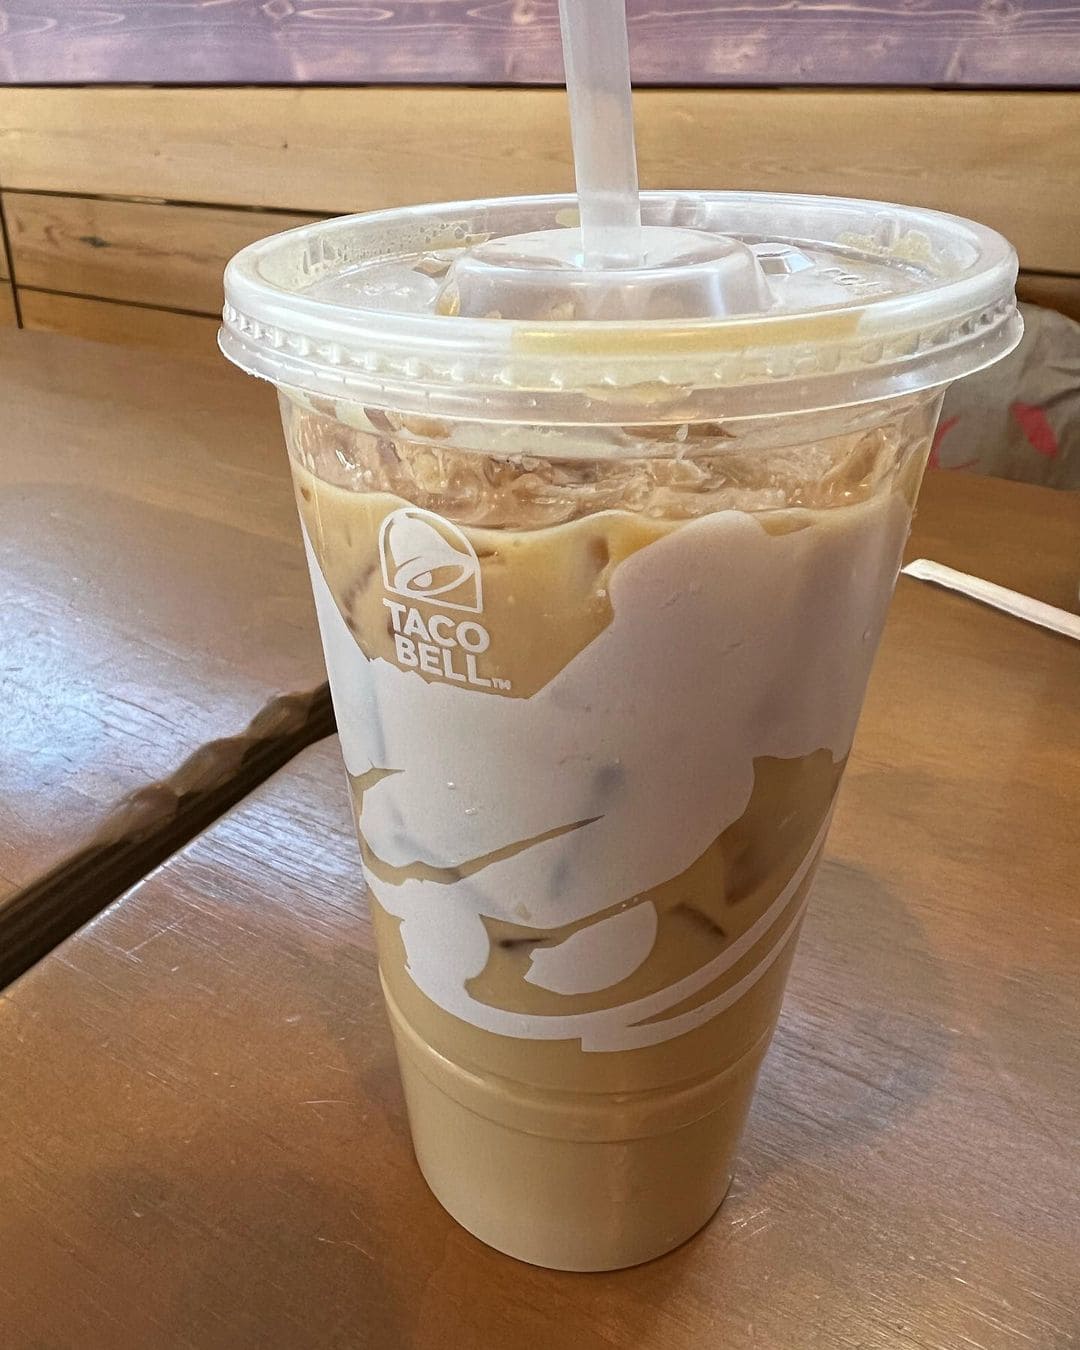 how much cream and sugar to put in Taco Bell coffee